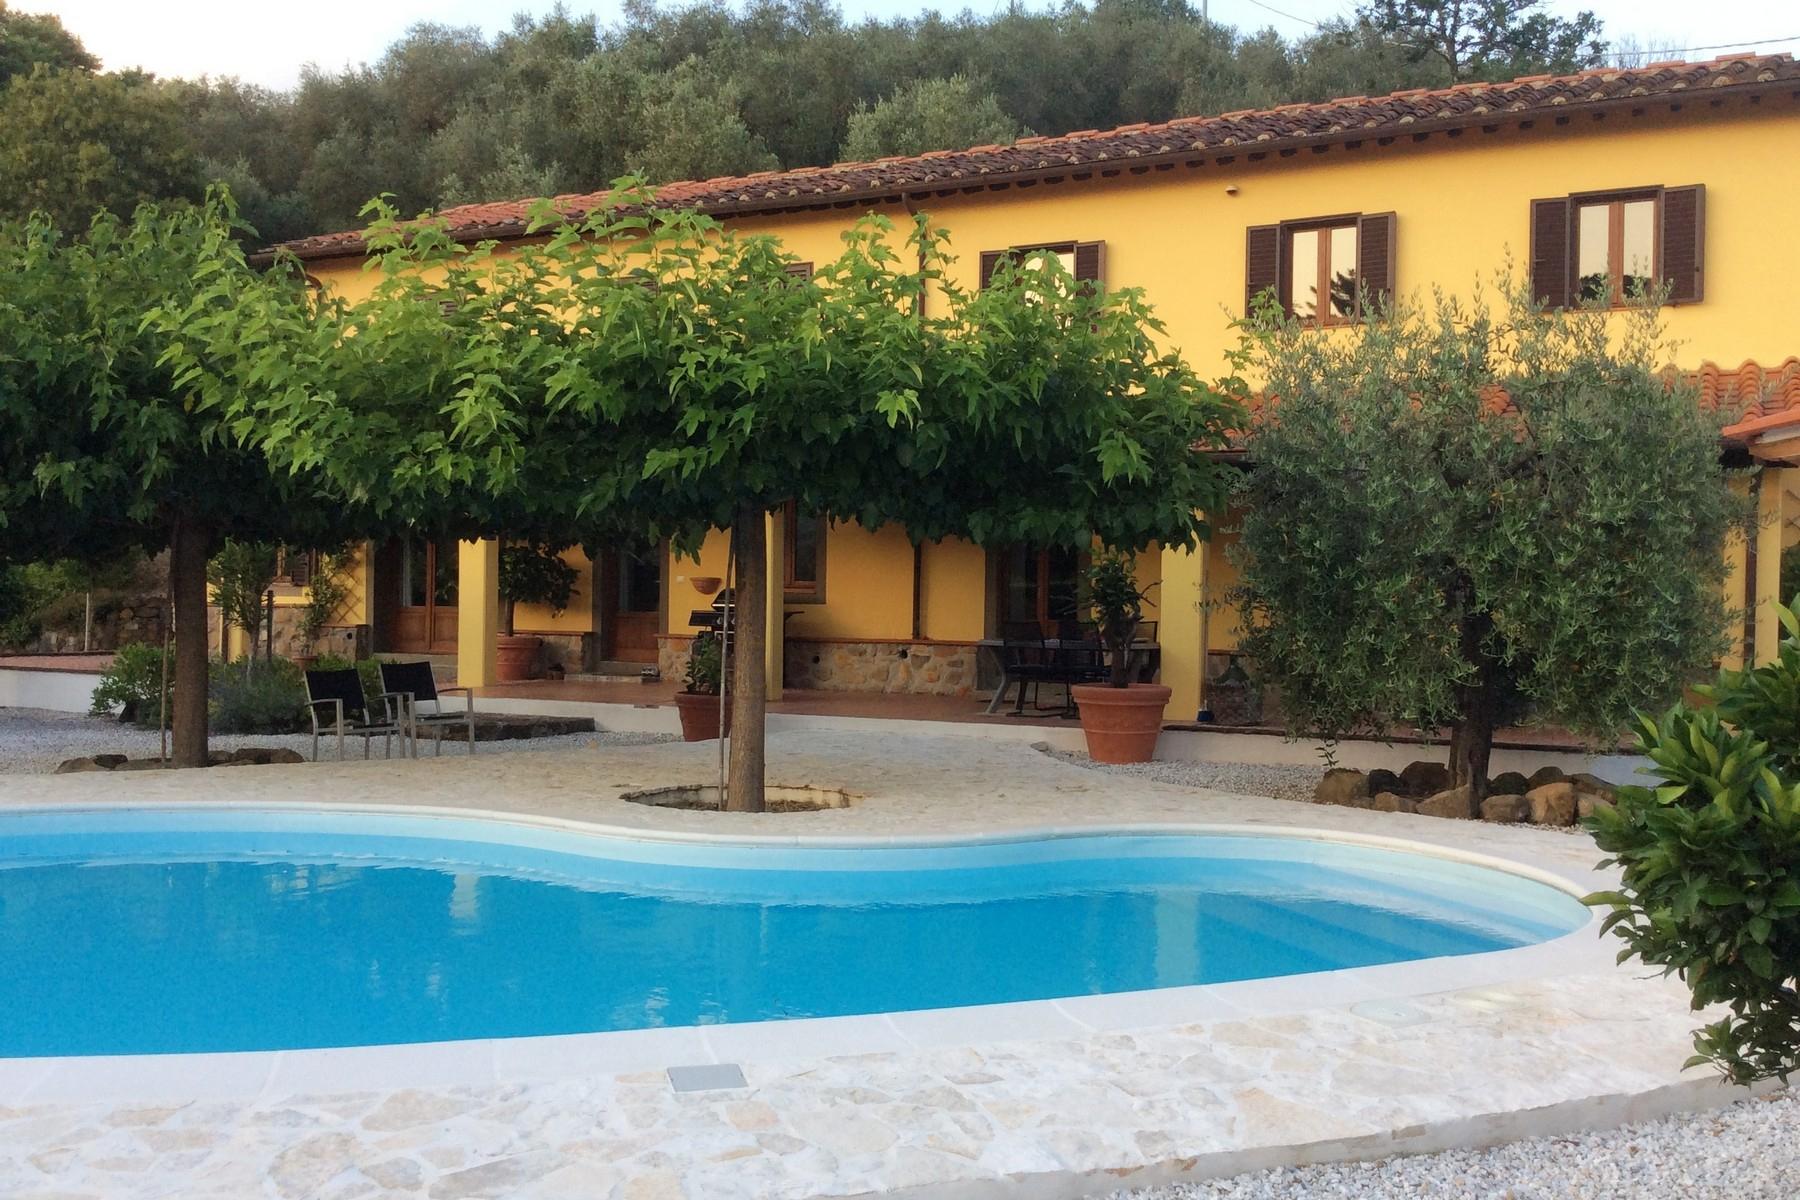 Villa with pool on the hills of Pescia - 1